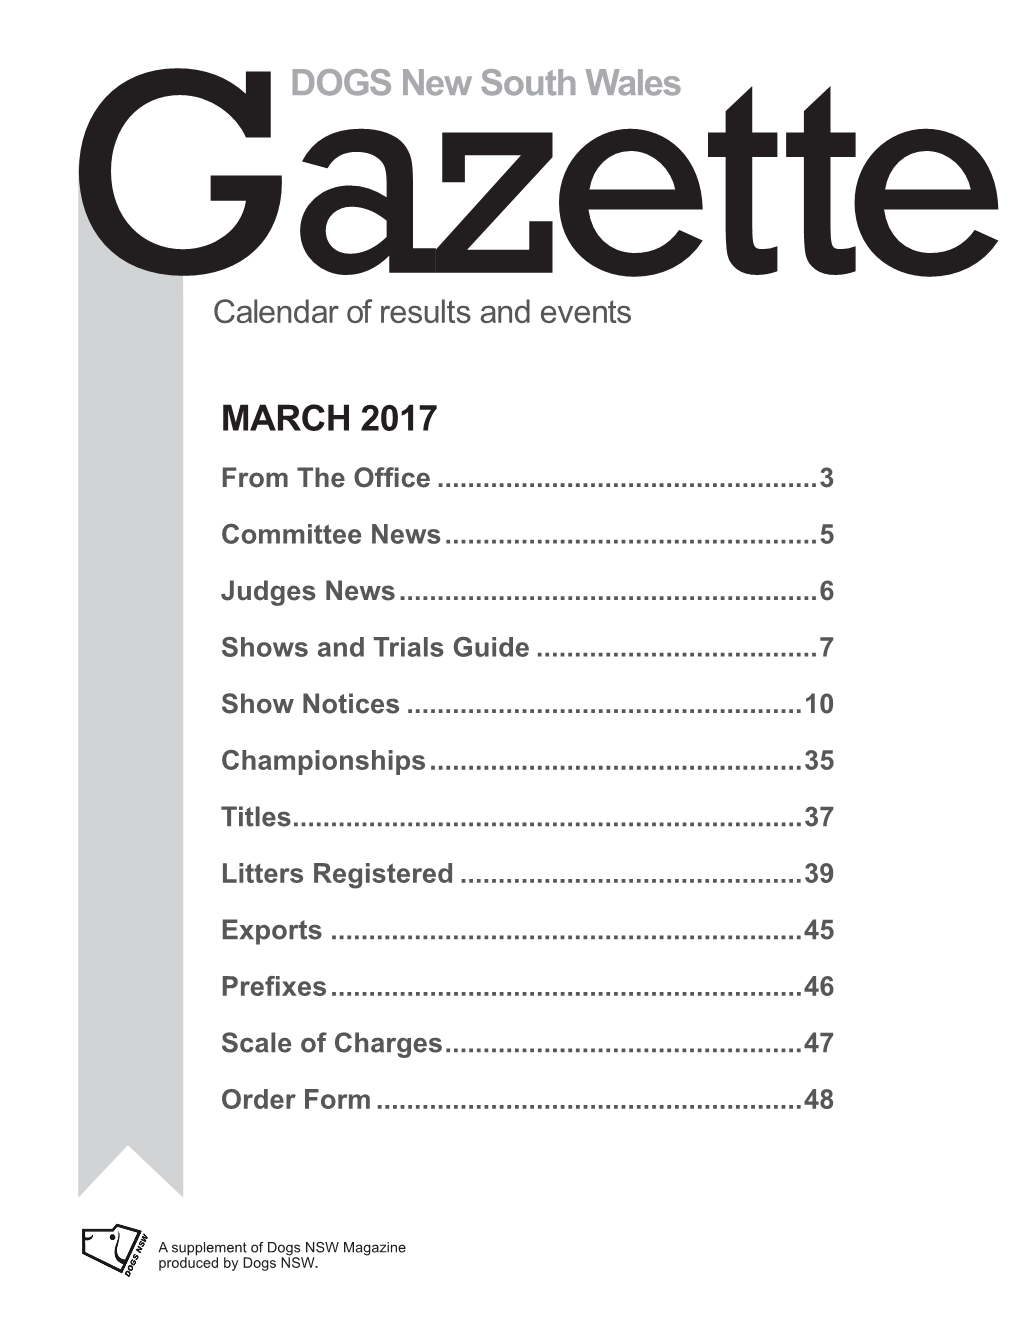 Gazettecalendar of Results and Events